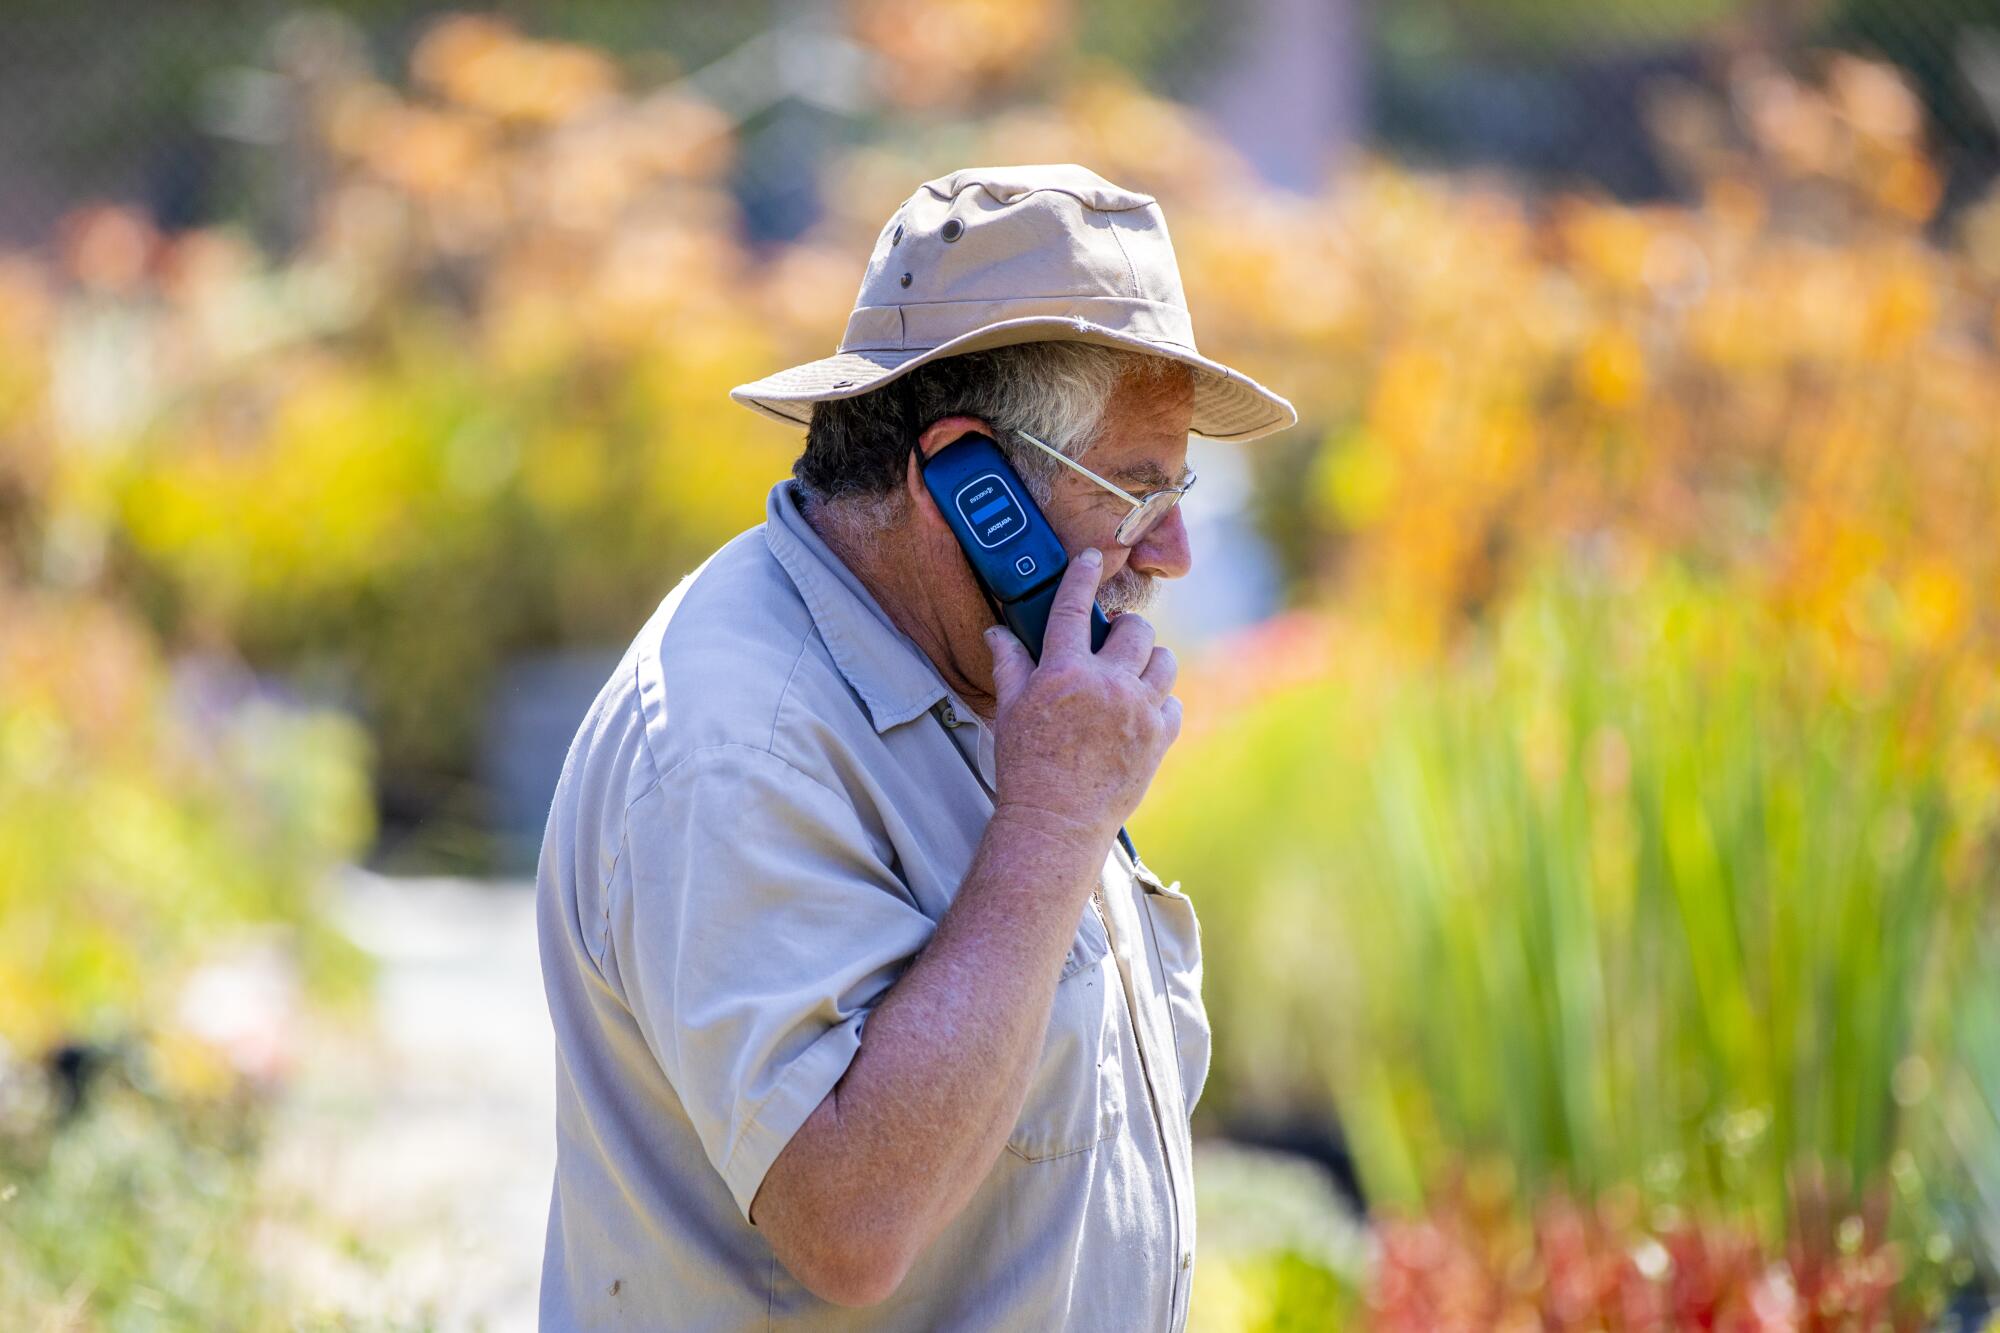 David Bernstein, owner of the Cactus Ranch, takes a call on a flip phone.